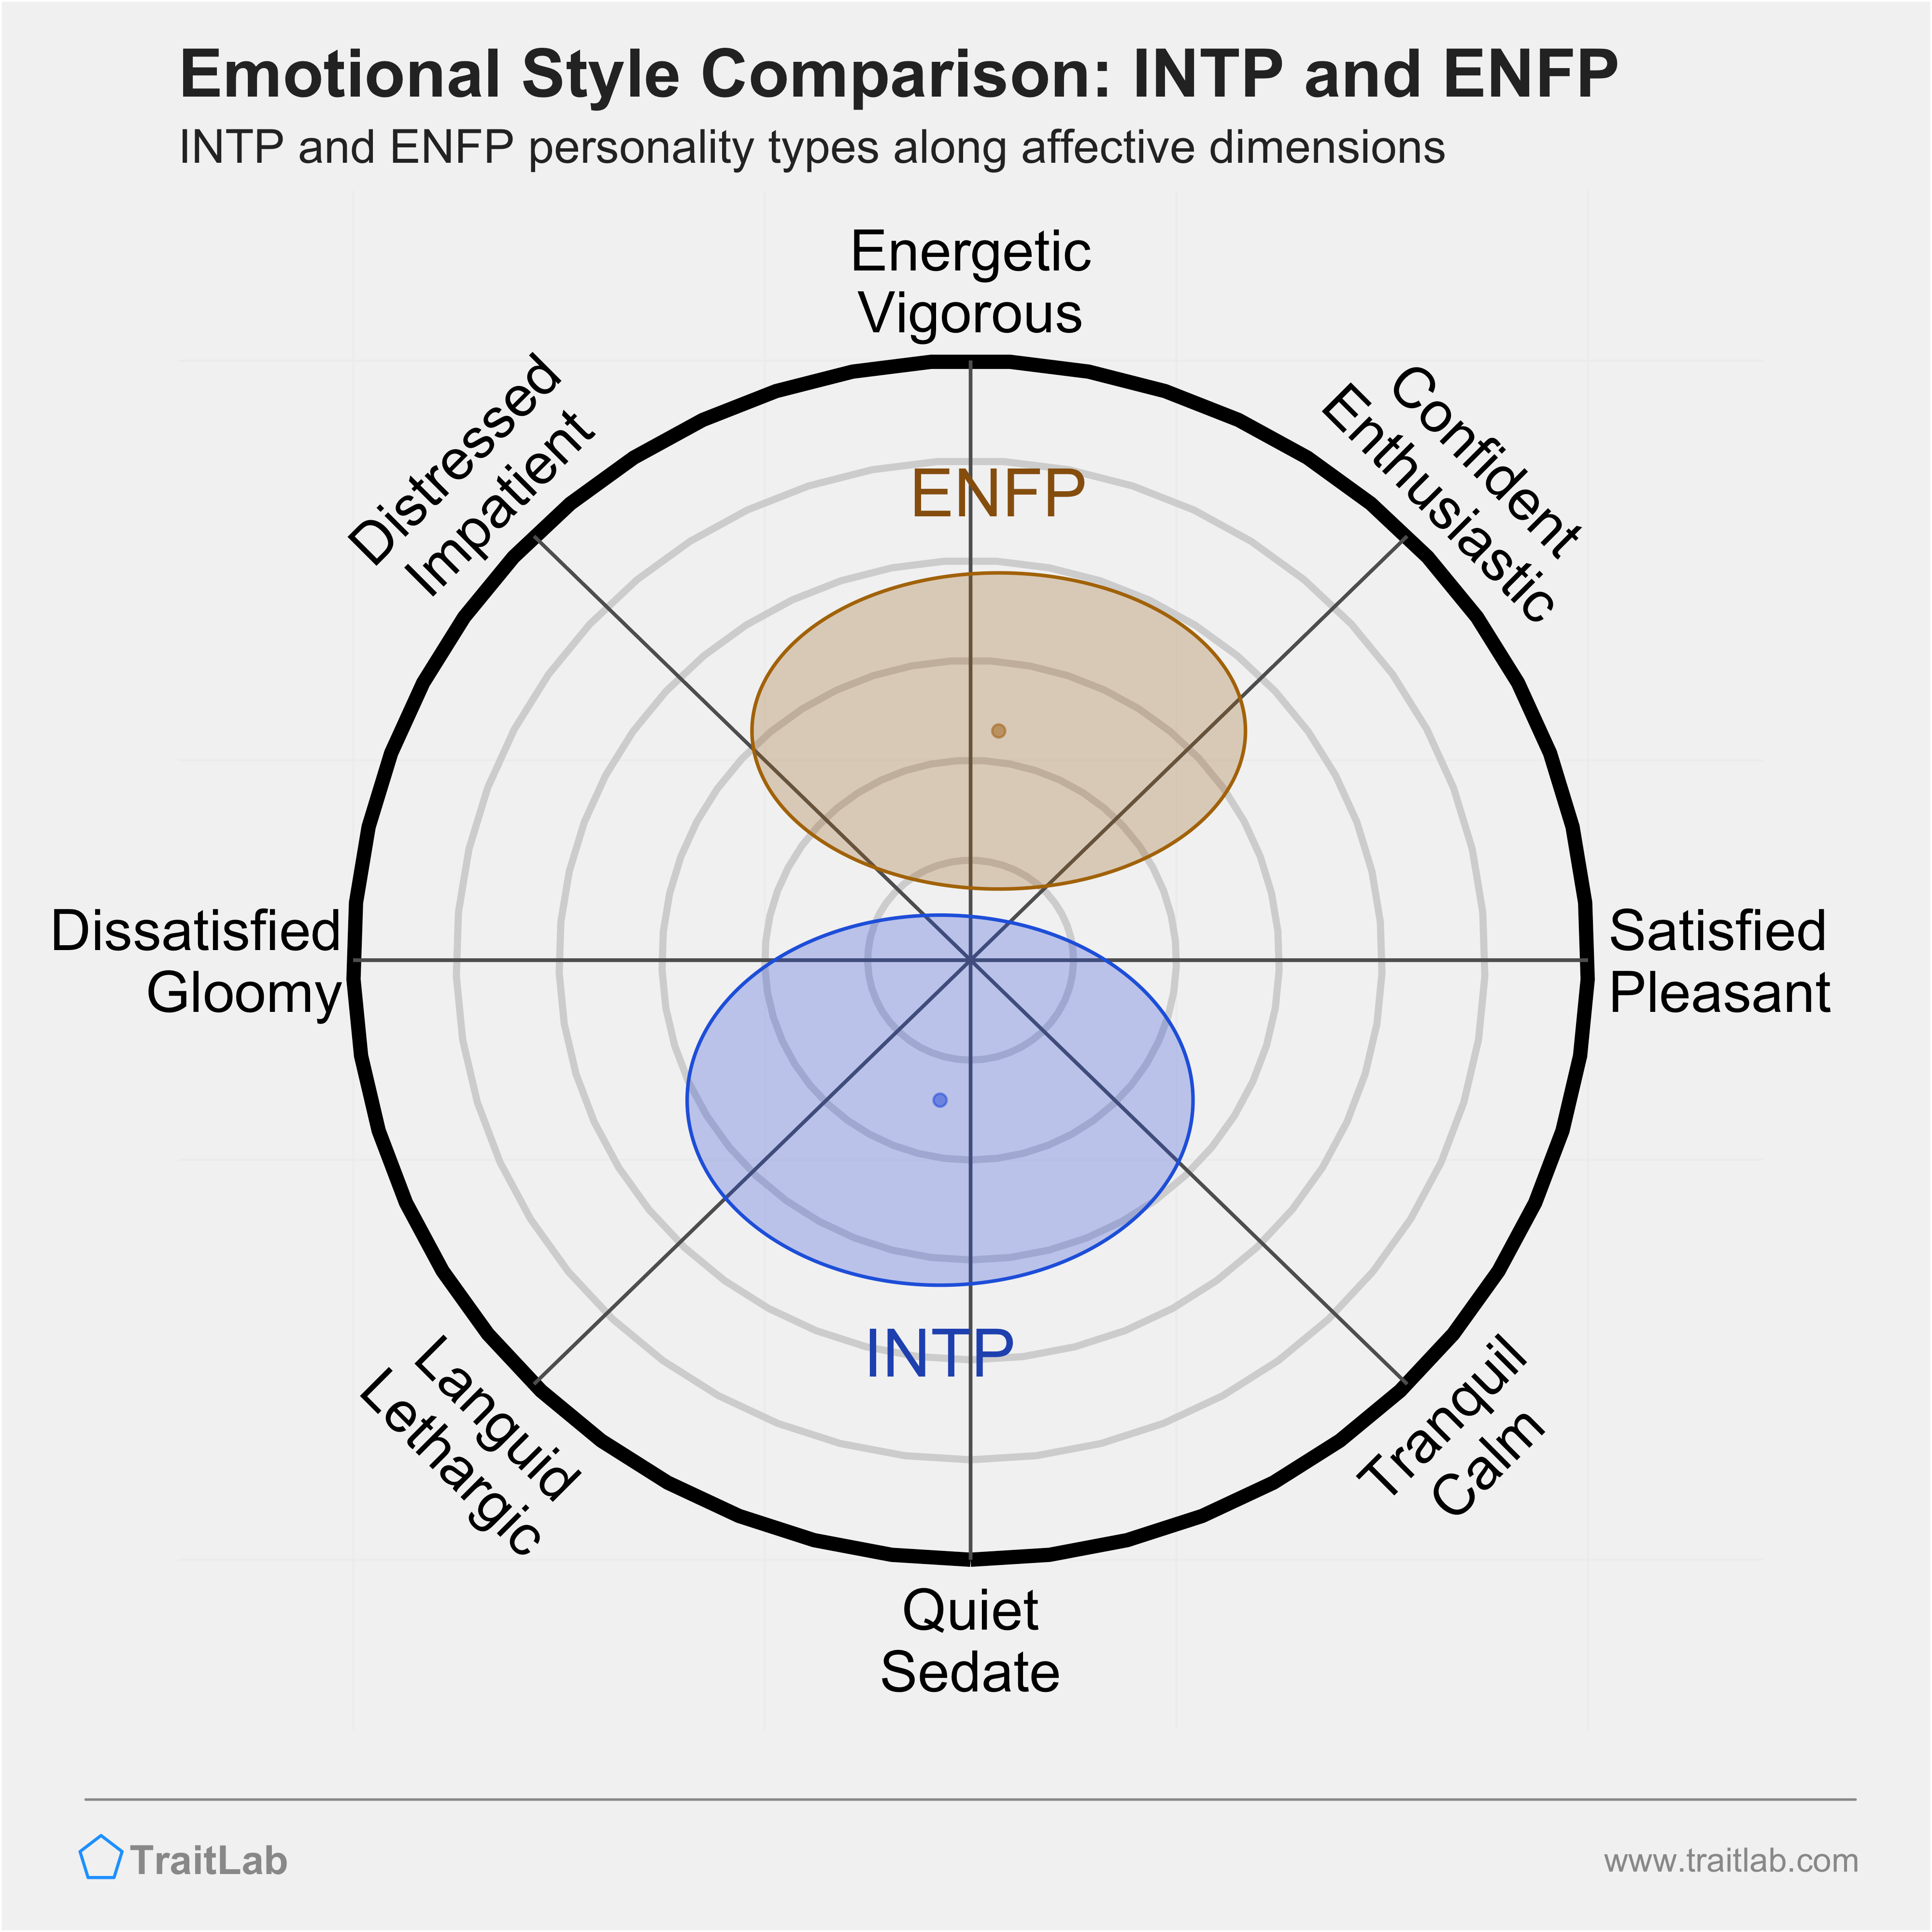 INTP and ENFP comparison across emotional (affective) dimensions